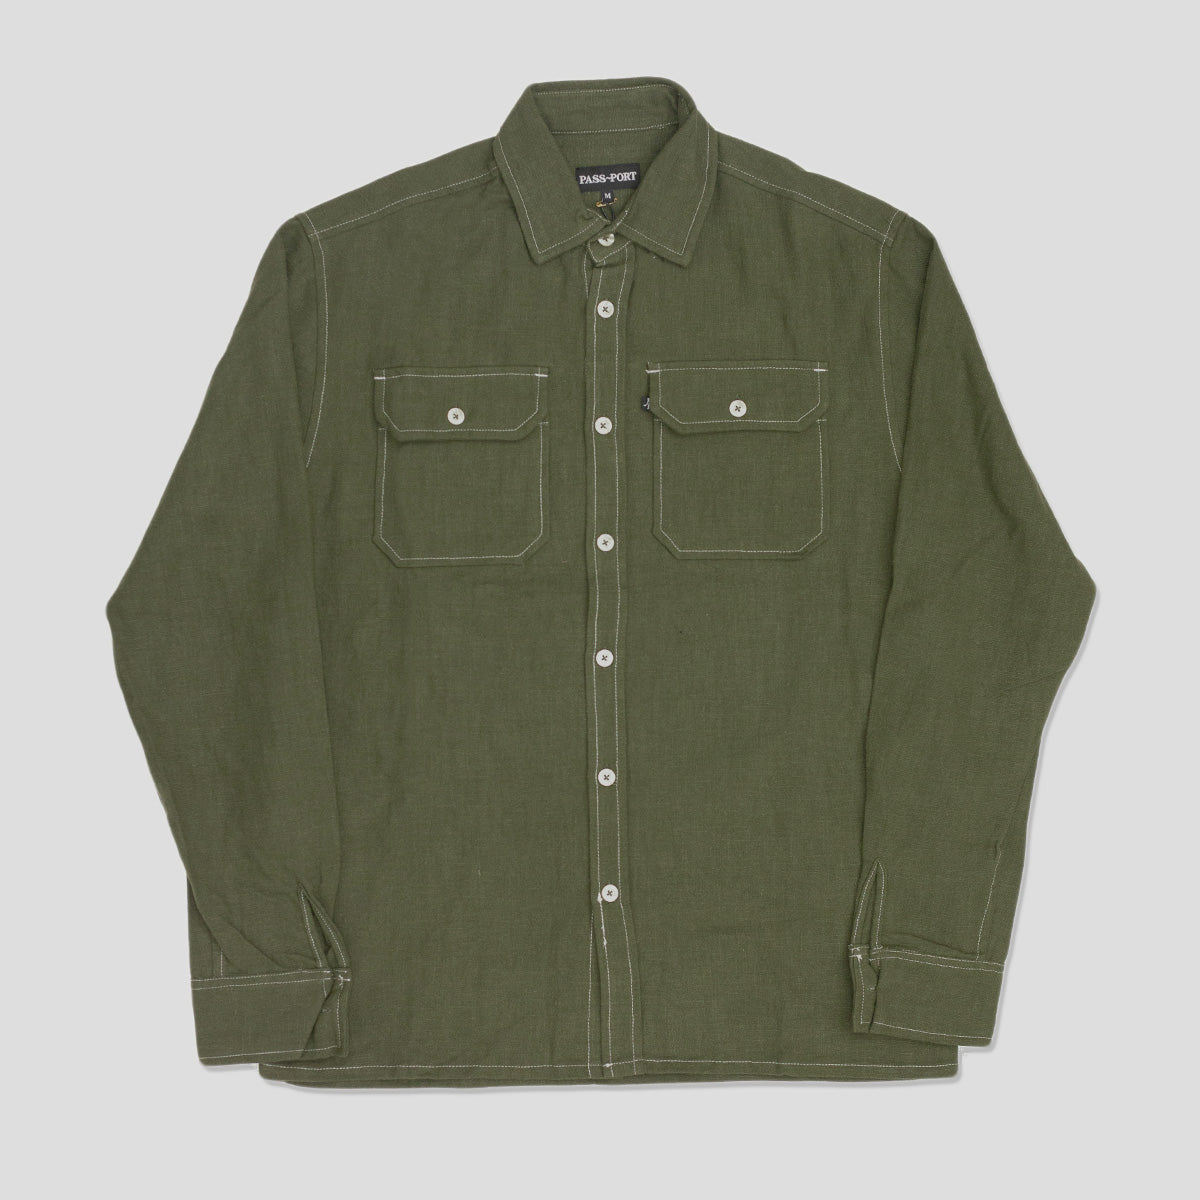 PASS~PORT "WORKERS CONTRAST" L/S SHIRT OLIVE